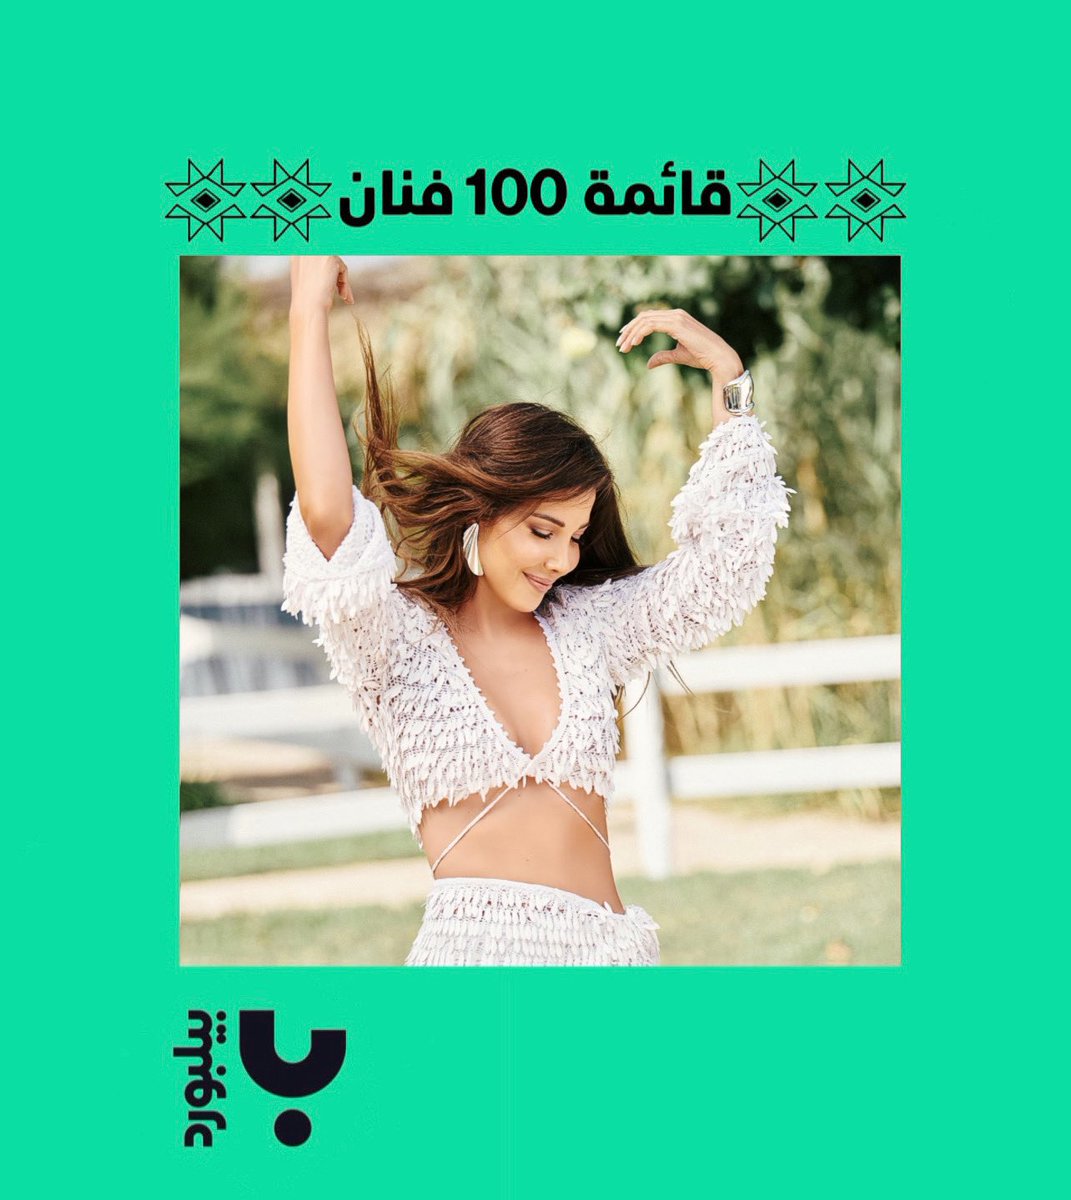 Nancy Ajram is the only Lebanese artist to appear on the top 10 of the Billboard Arabia 100 artists for 16 consecutive weeks 🤩!